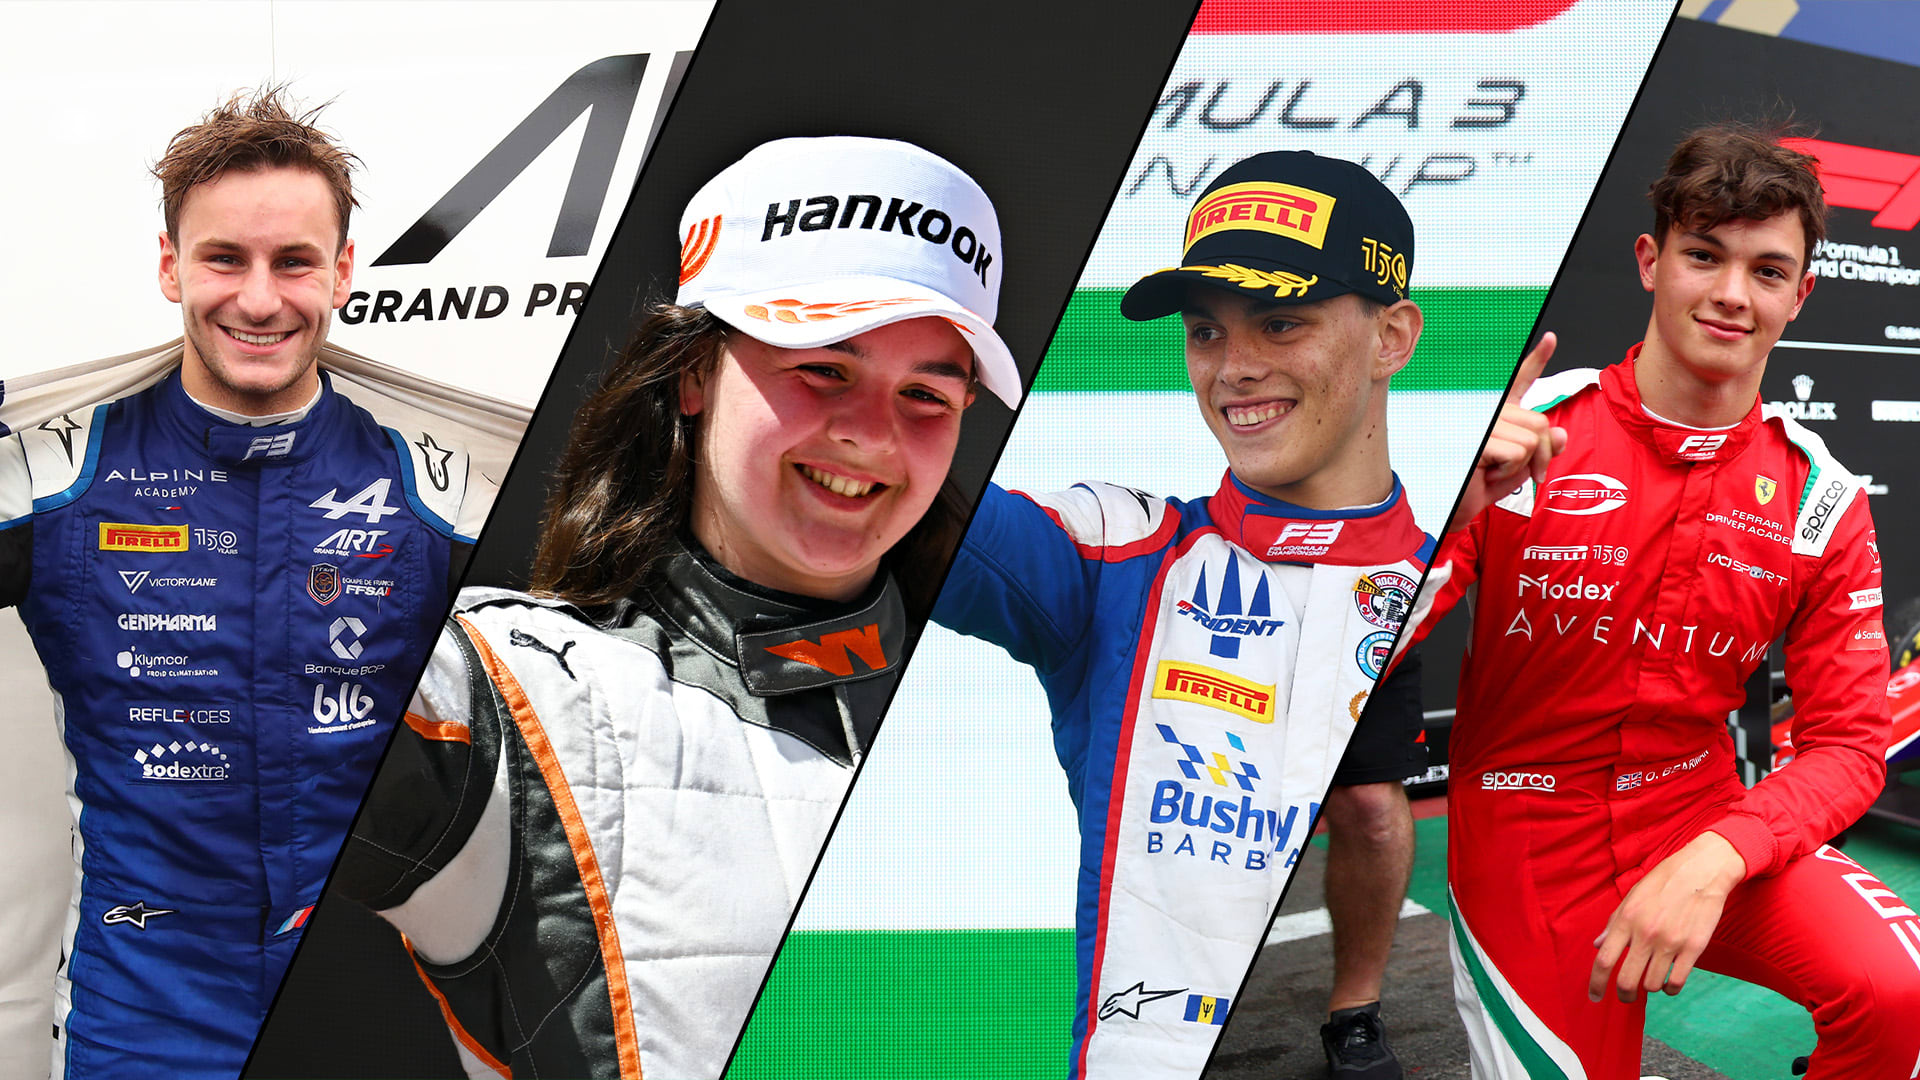 NEXT GEN: 20 of the most exciting up-and-coming talents on the road to F1